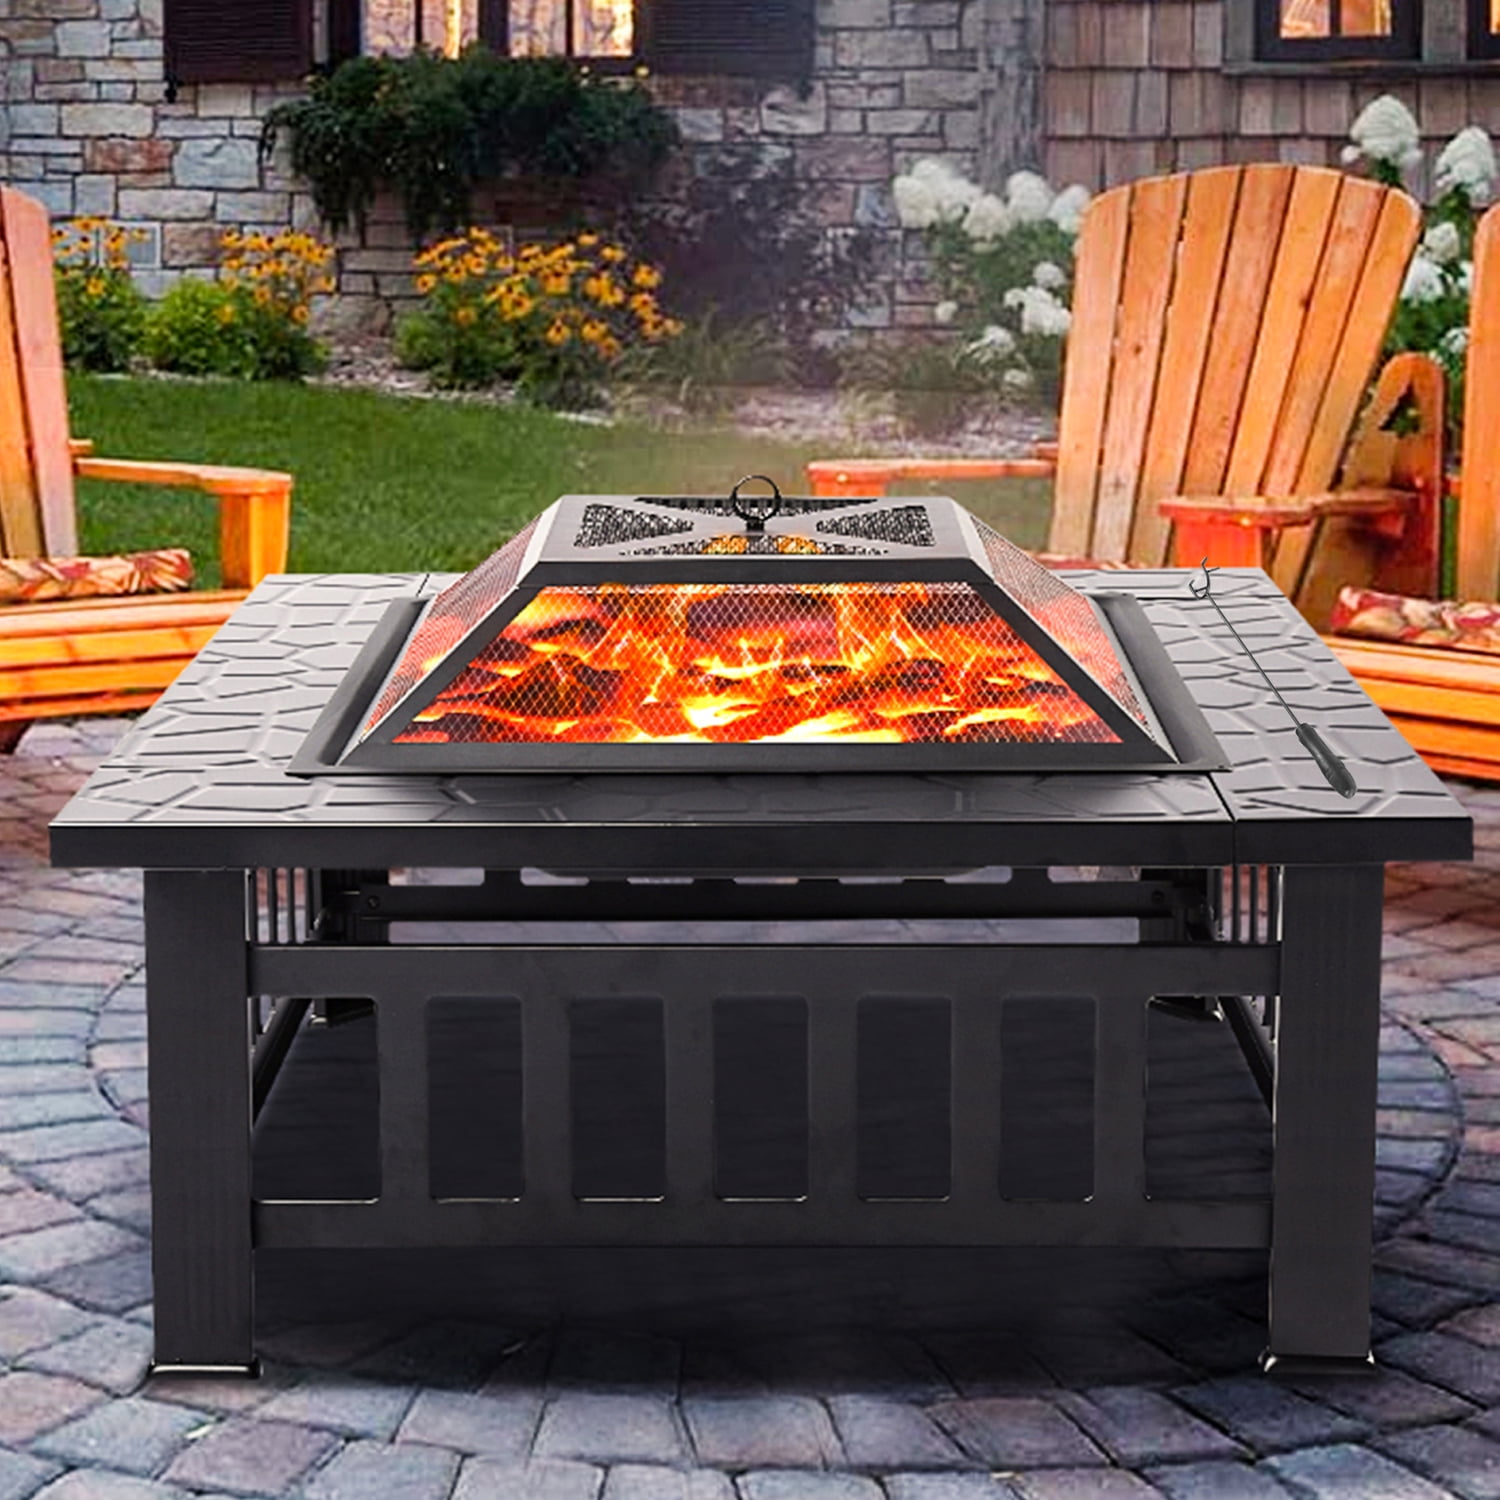 Garden Furniture Cover Weatherproof Outdoor Patio Fire Pit Grill BBQ Protection